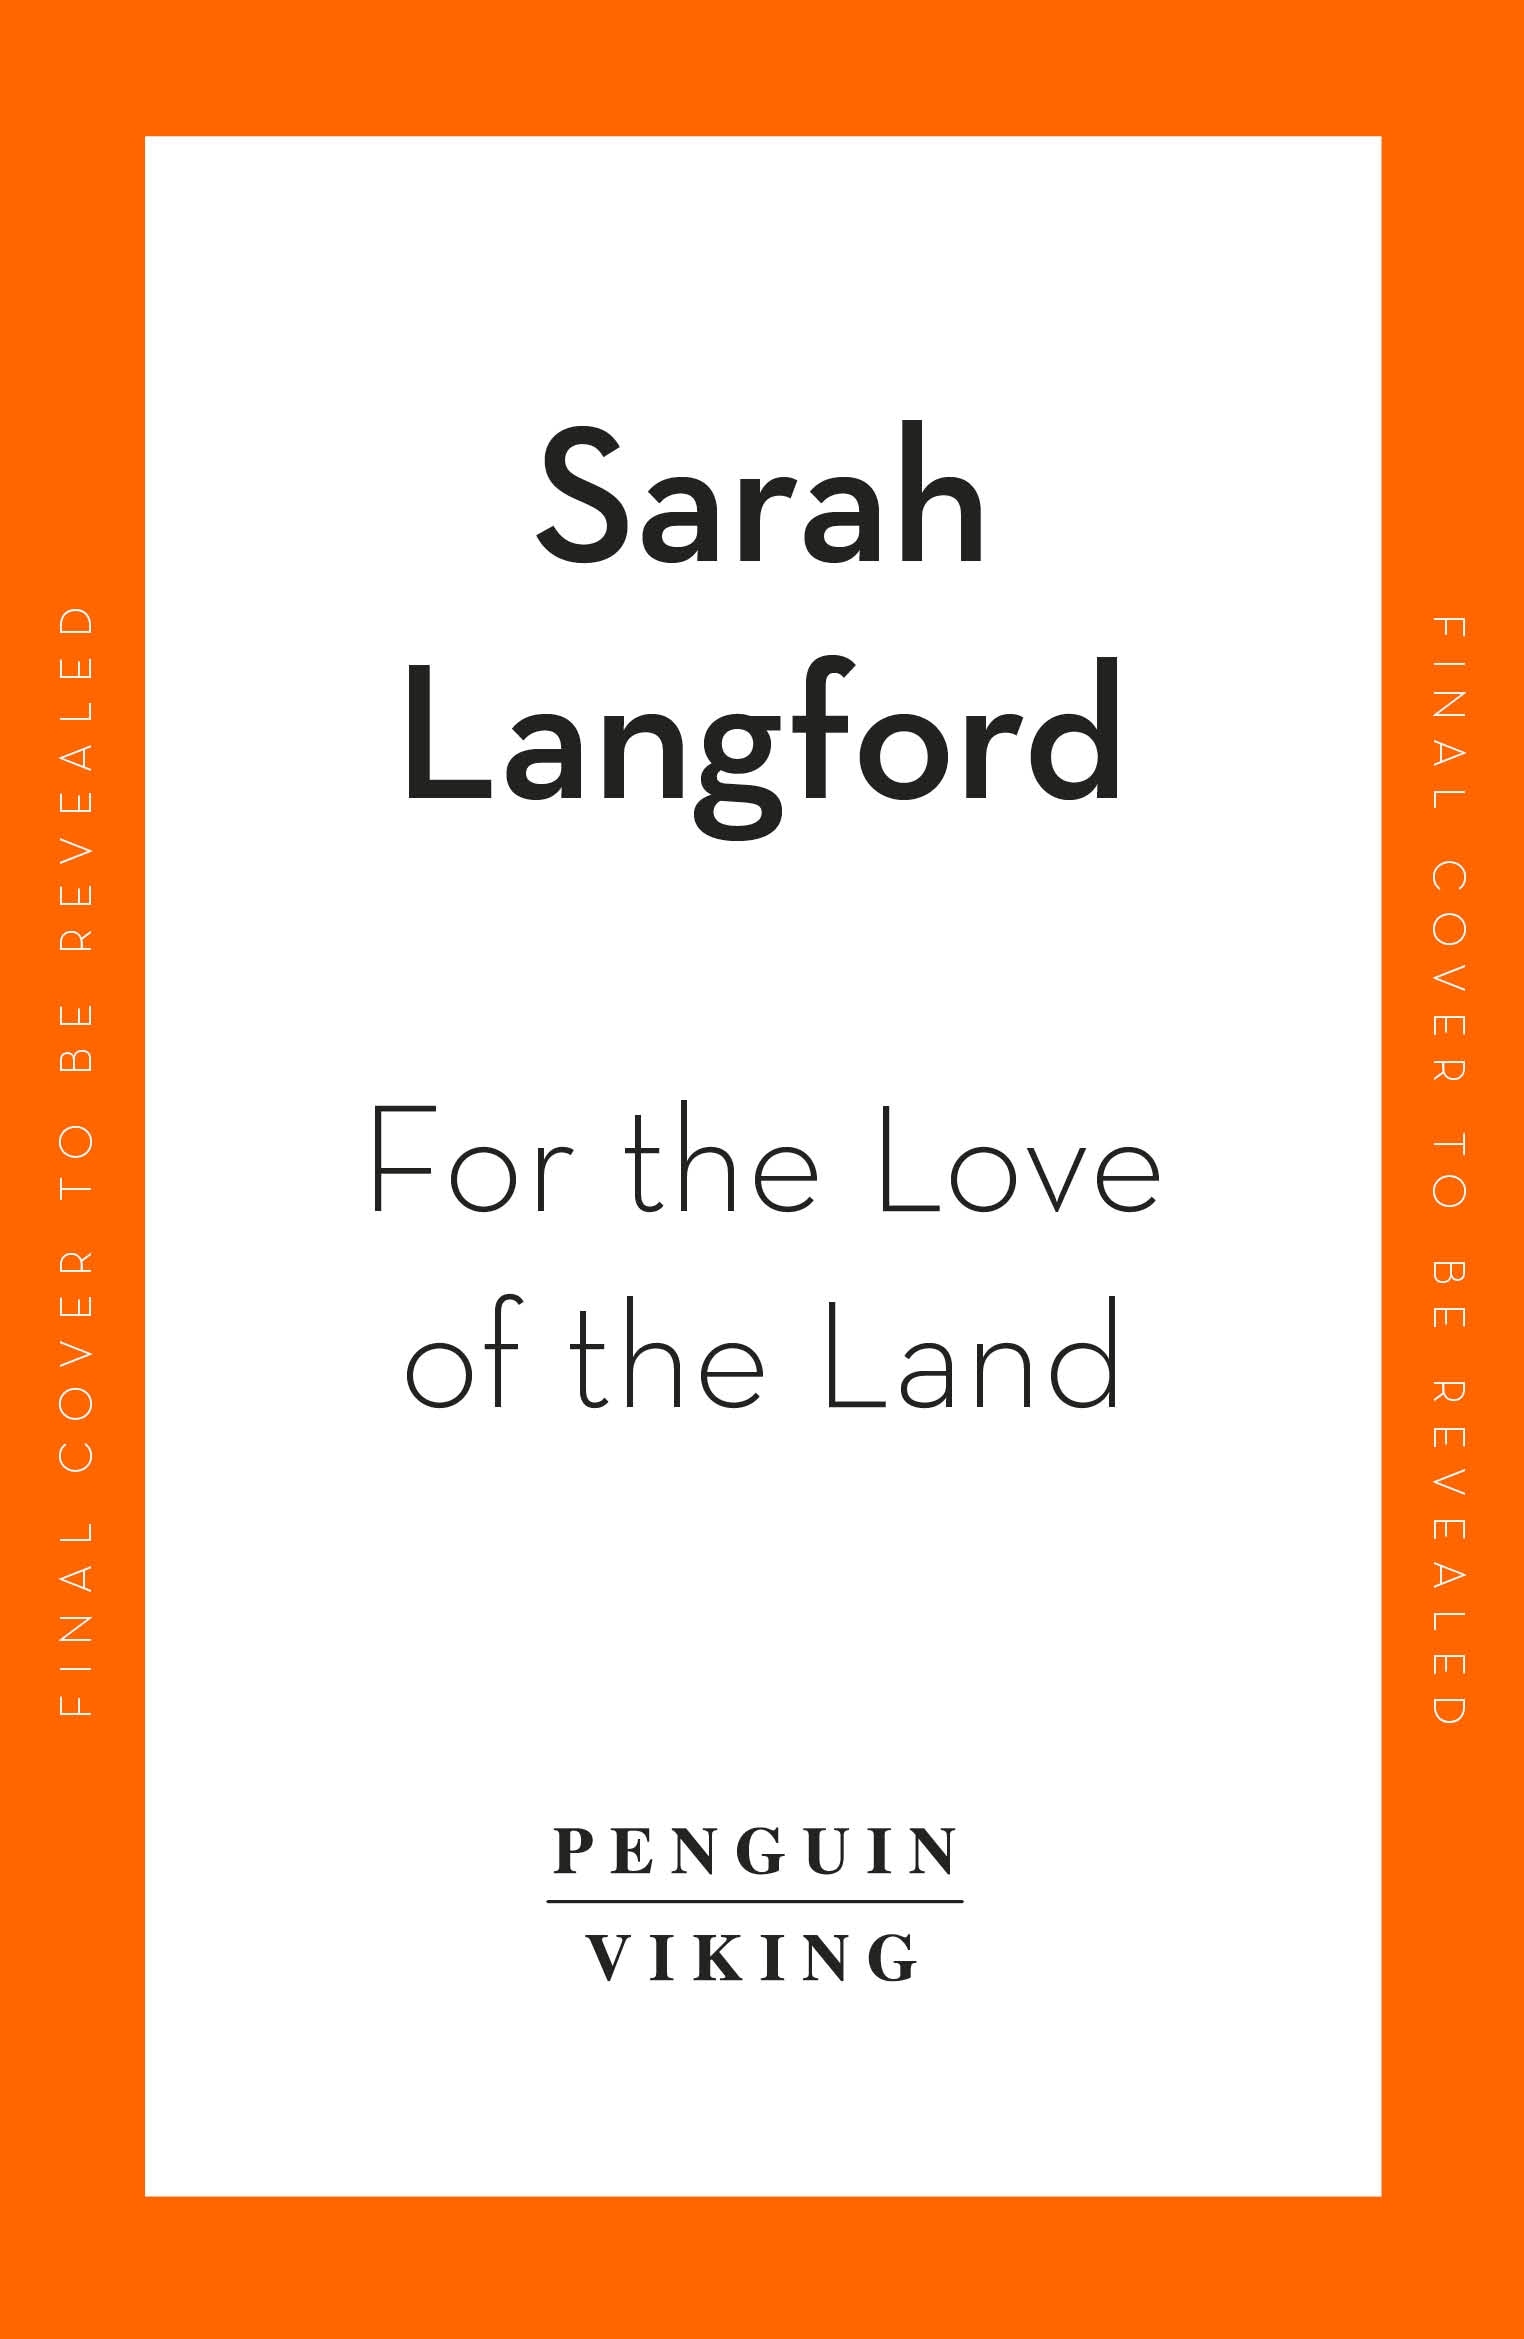 Book “For the Love of the Land” by Sarah Langford — July 7, 2022